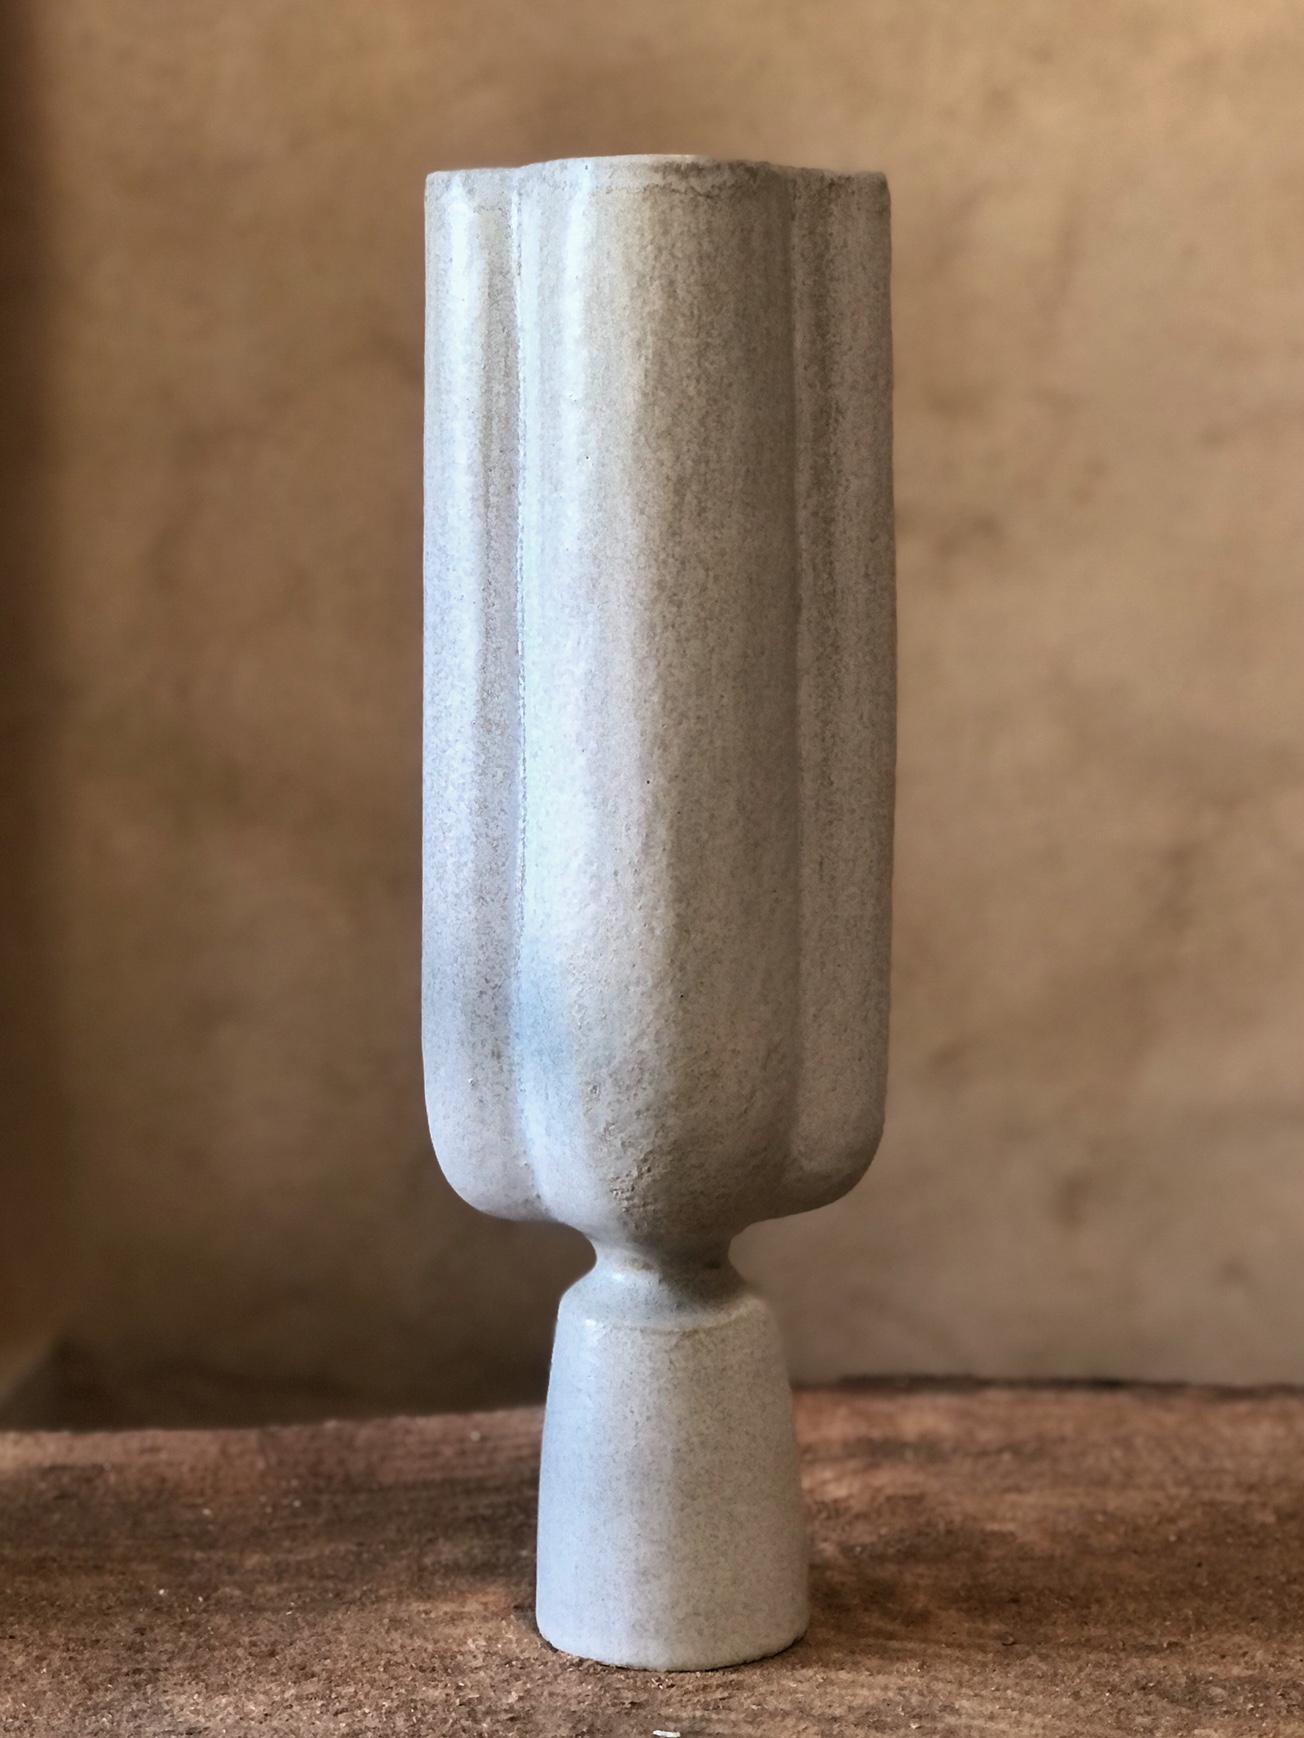 Clover Vase by Sophie Vaidie
One Of A Kind.
Dimensions: D 13 x W 14 x H 42 cm. 
Materials: Beige stoneware with beige glaze.

In the beginning, there was a need to make, with the hands, the touch, the senses. Then came the desire to create and